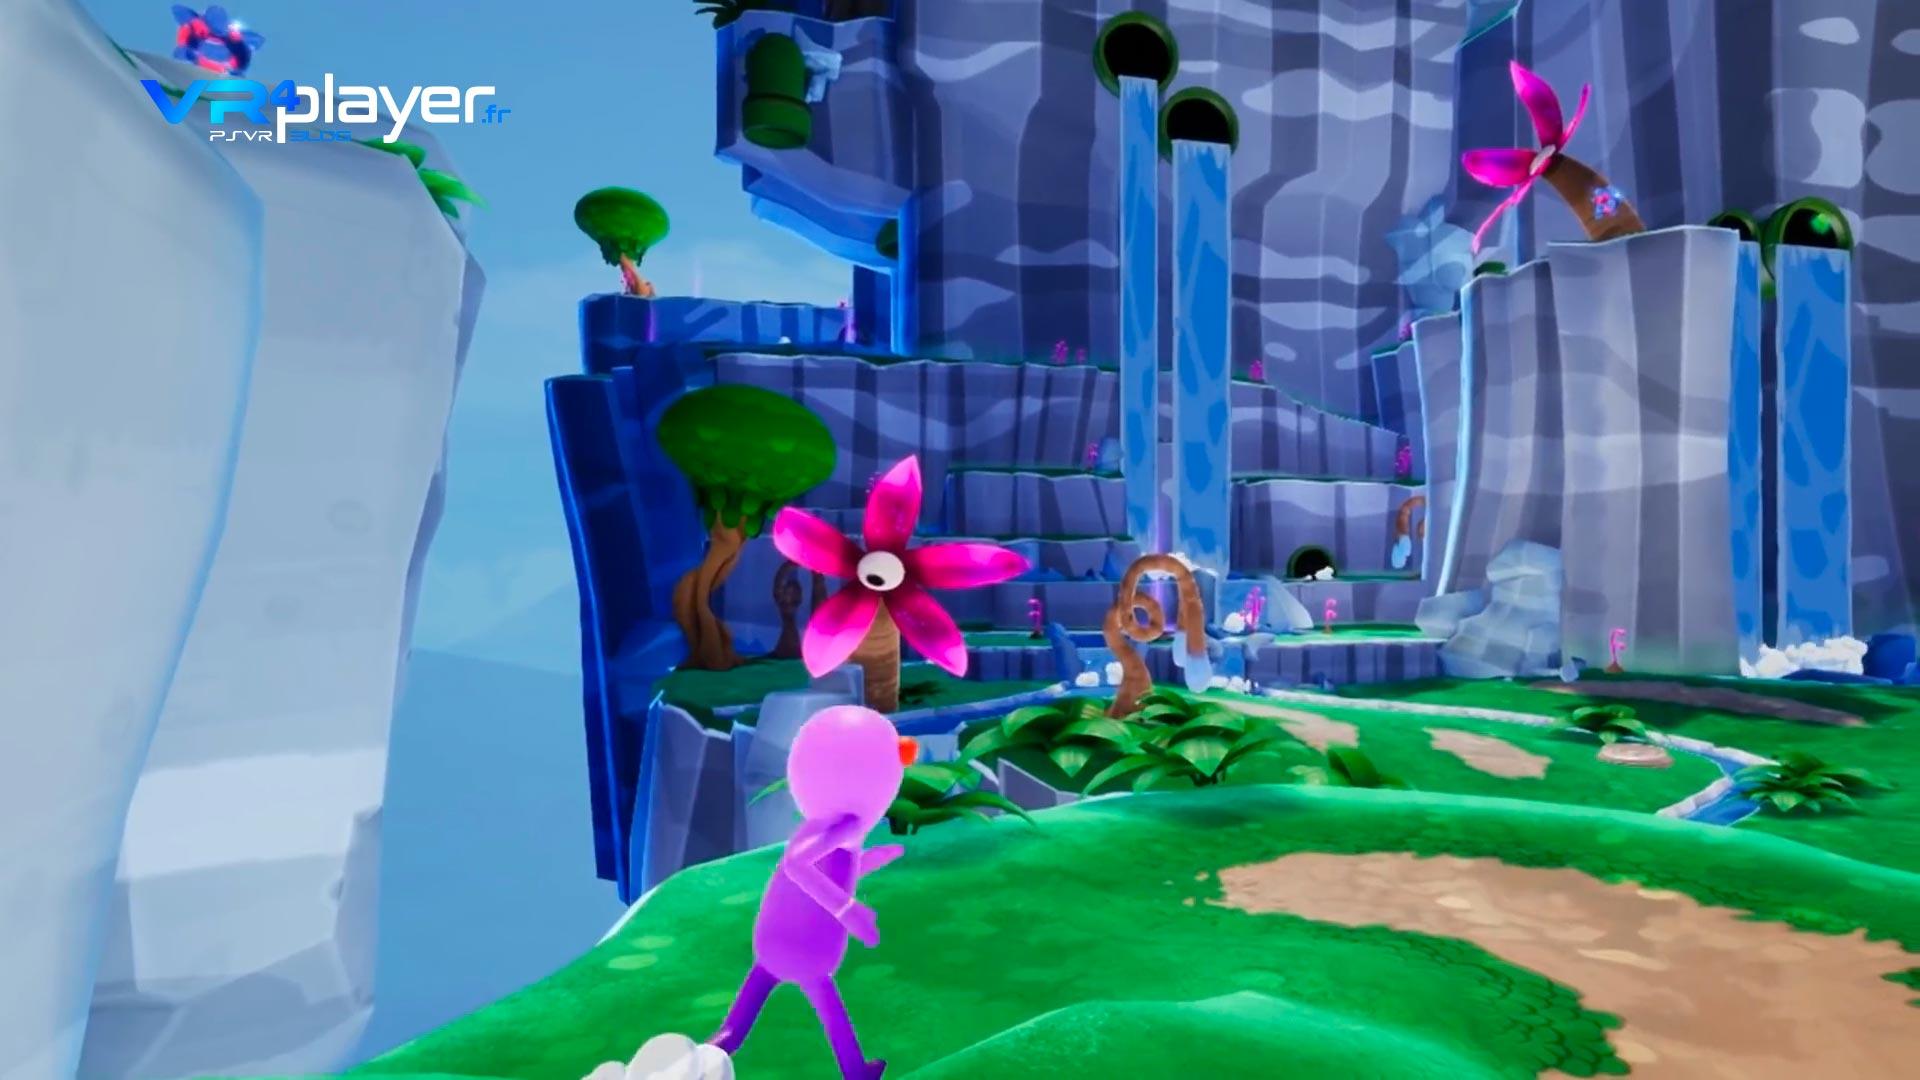 VR4player Trover Saves The Universe PSVR Img04